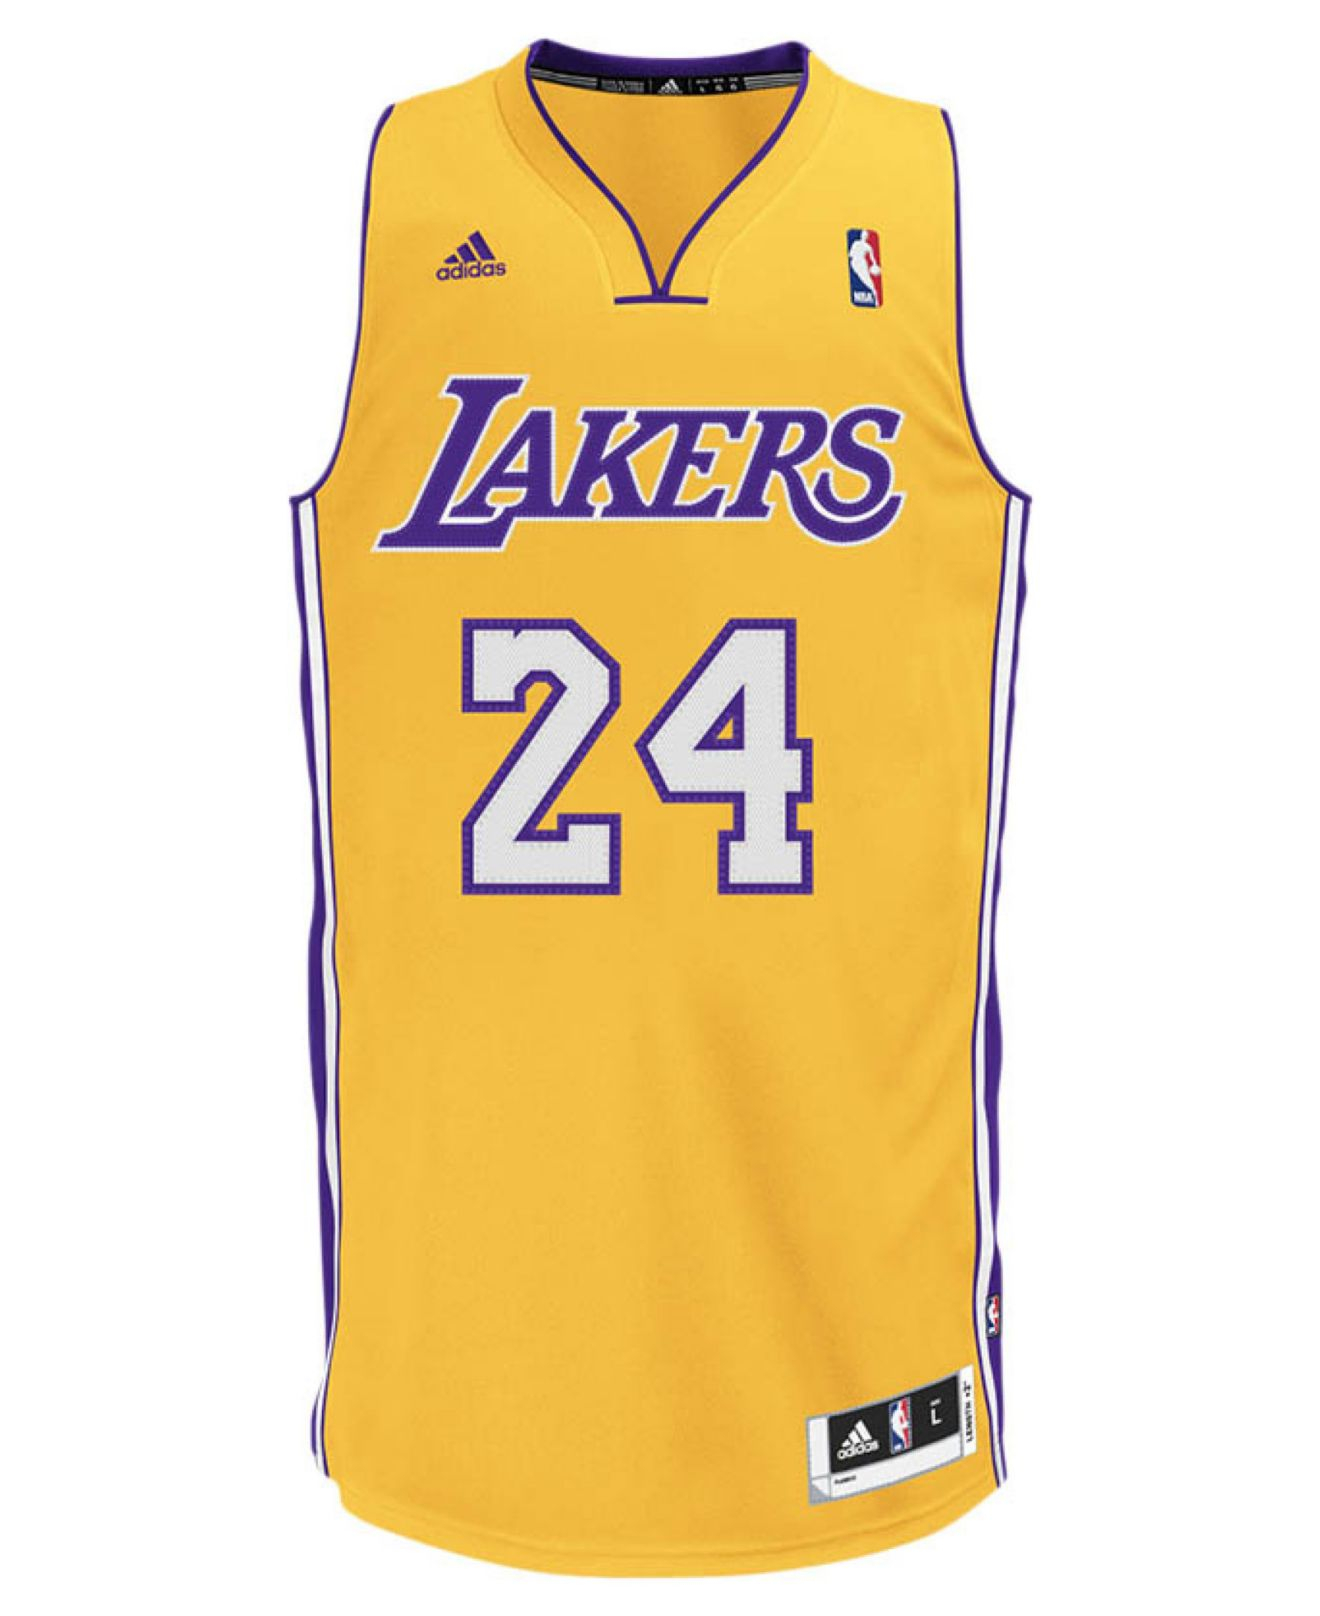 adidas Men's Los Angeles Lakers Kobe Bryant Jersey in Gold (Yellow ...